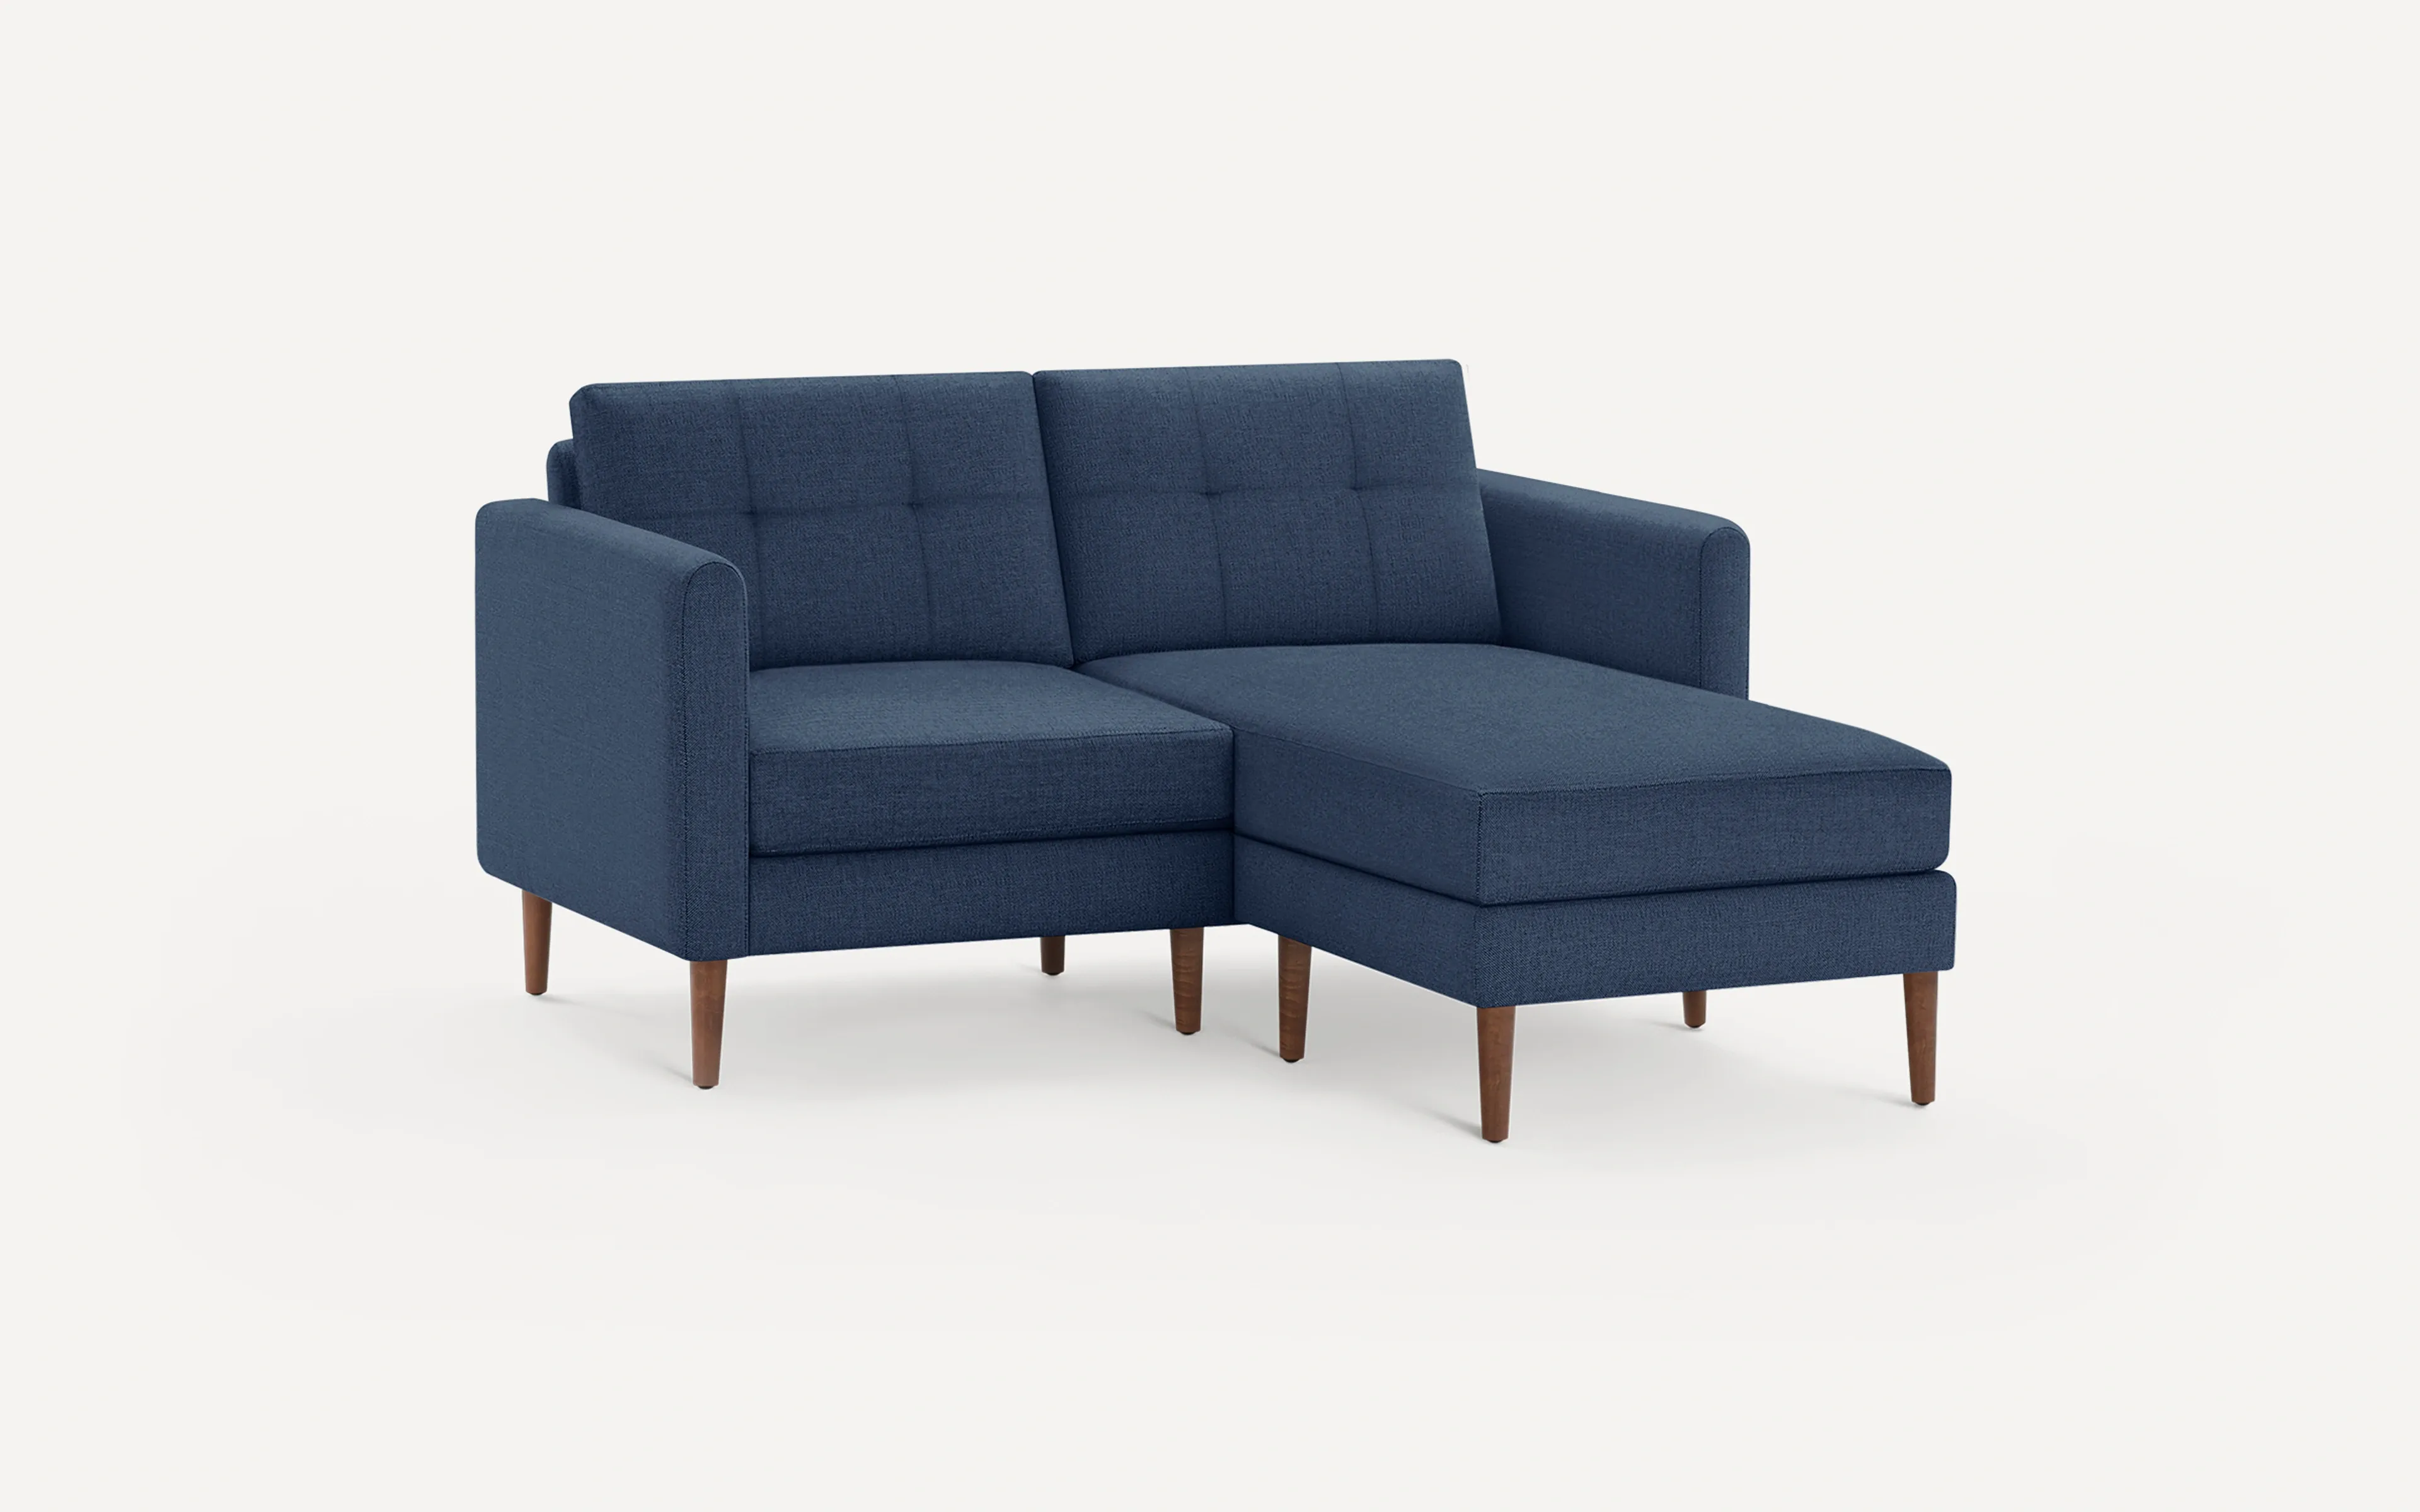 Original Nomad Chaise Loveseat in Navy Blue Fabric